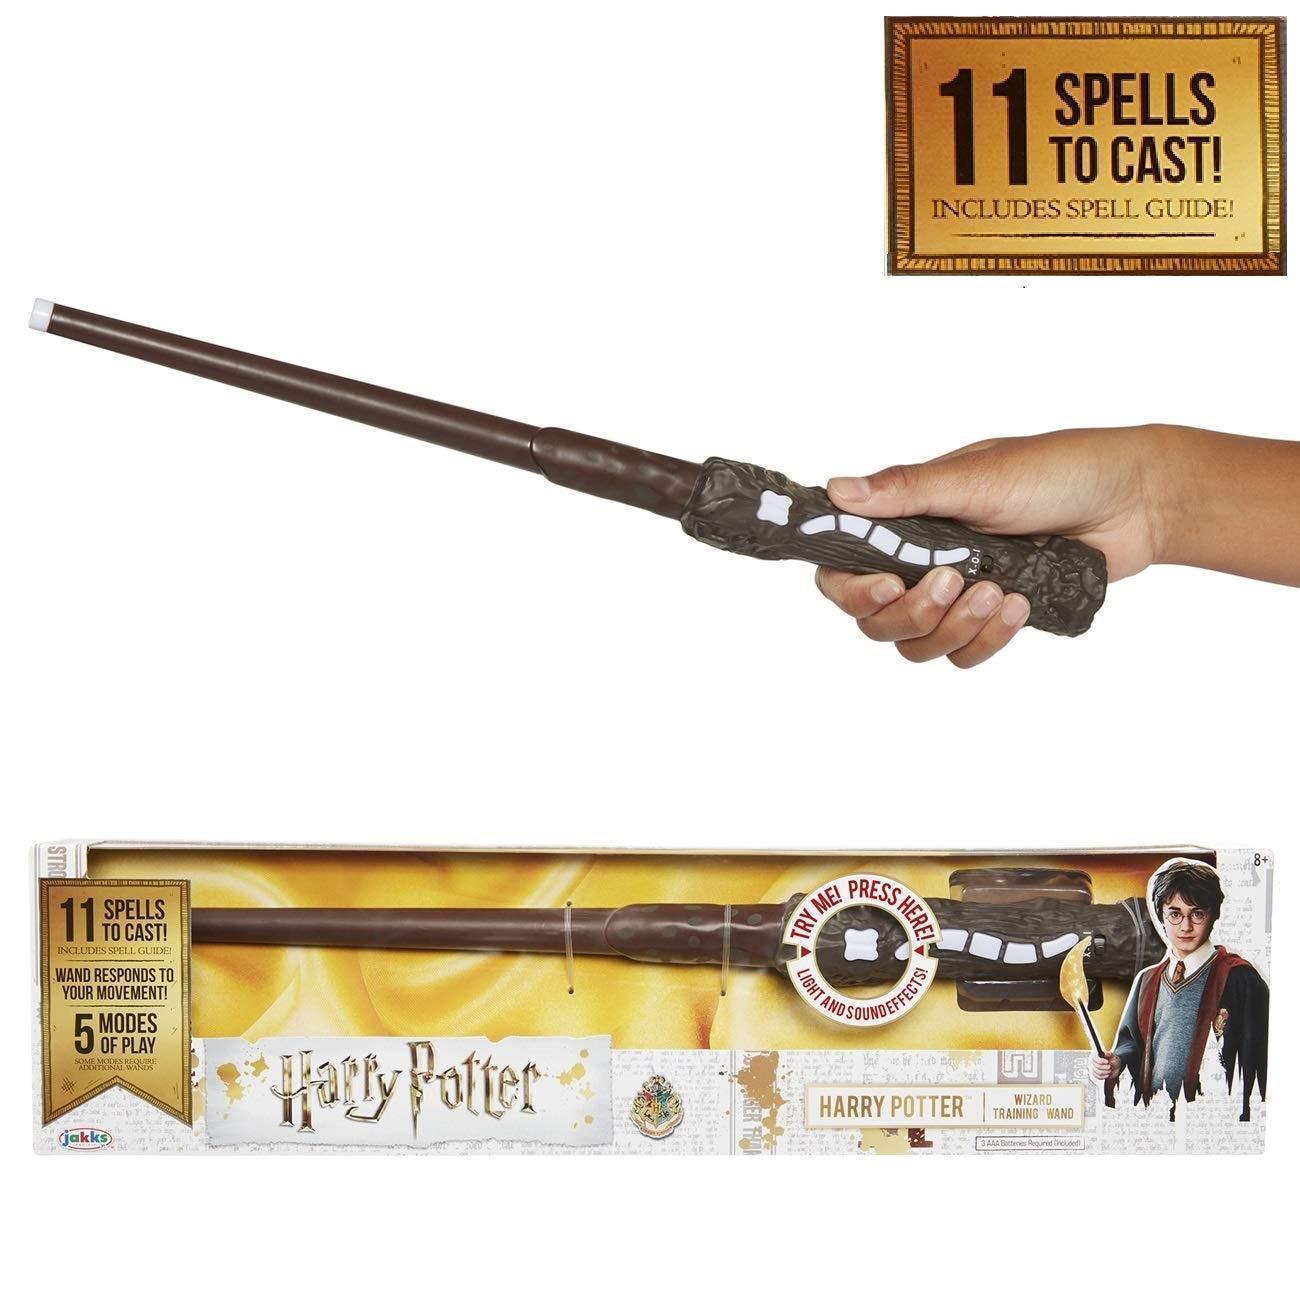 Harry Potter Harry Potter's Wizard Training Die Cast Wand - 11 Spells To Cast!